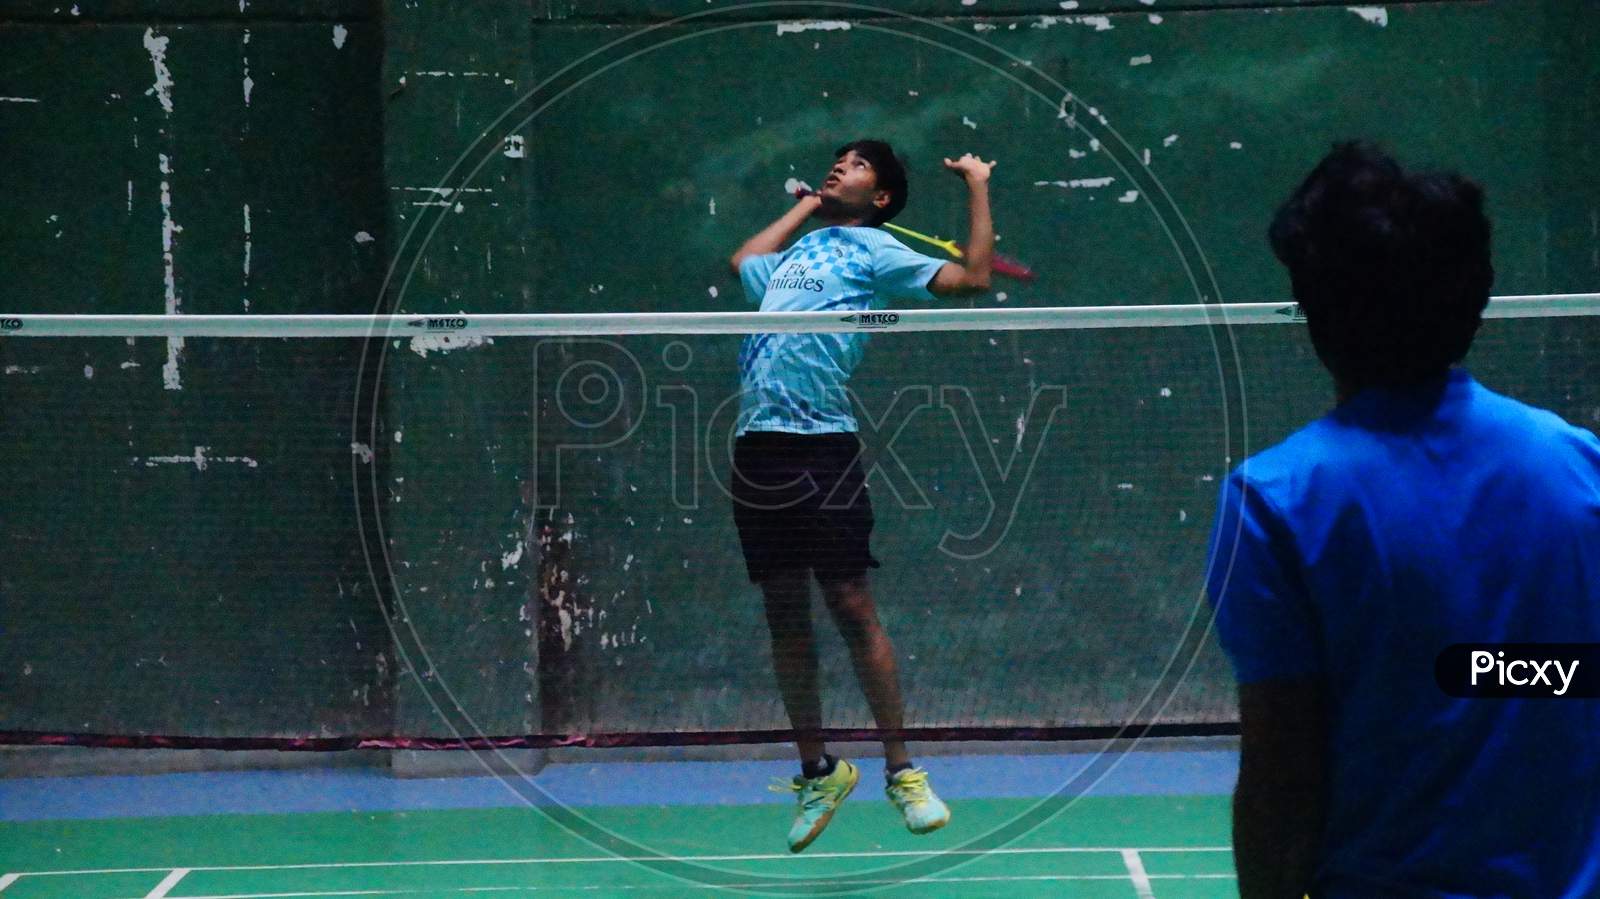 Image of Image of new badminton player attempting jump smash in multi shuttle strokes practice-EM653119-Picxy